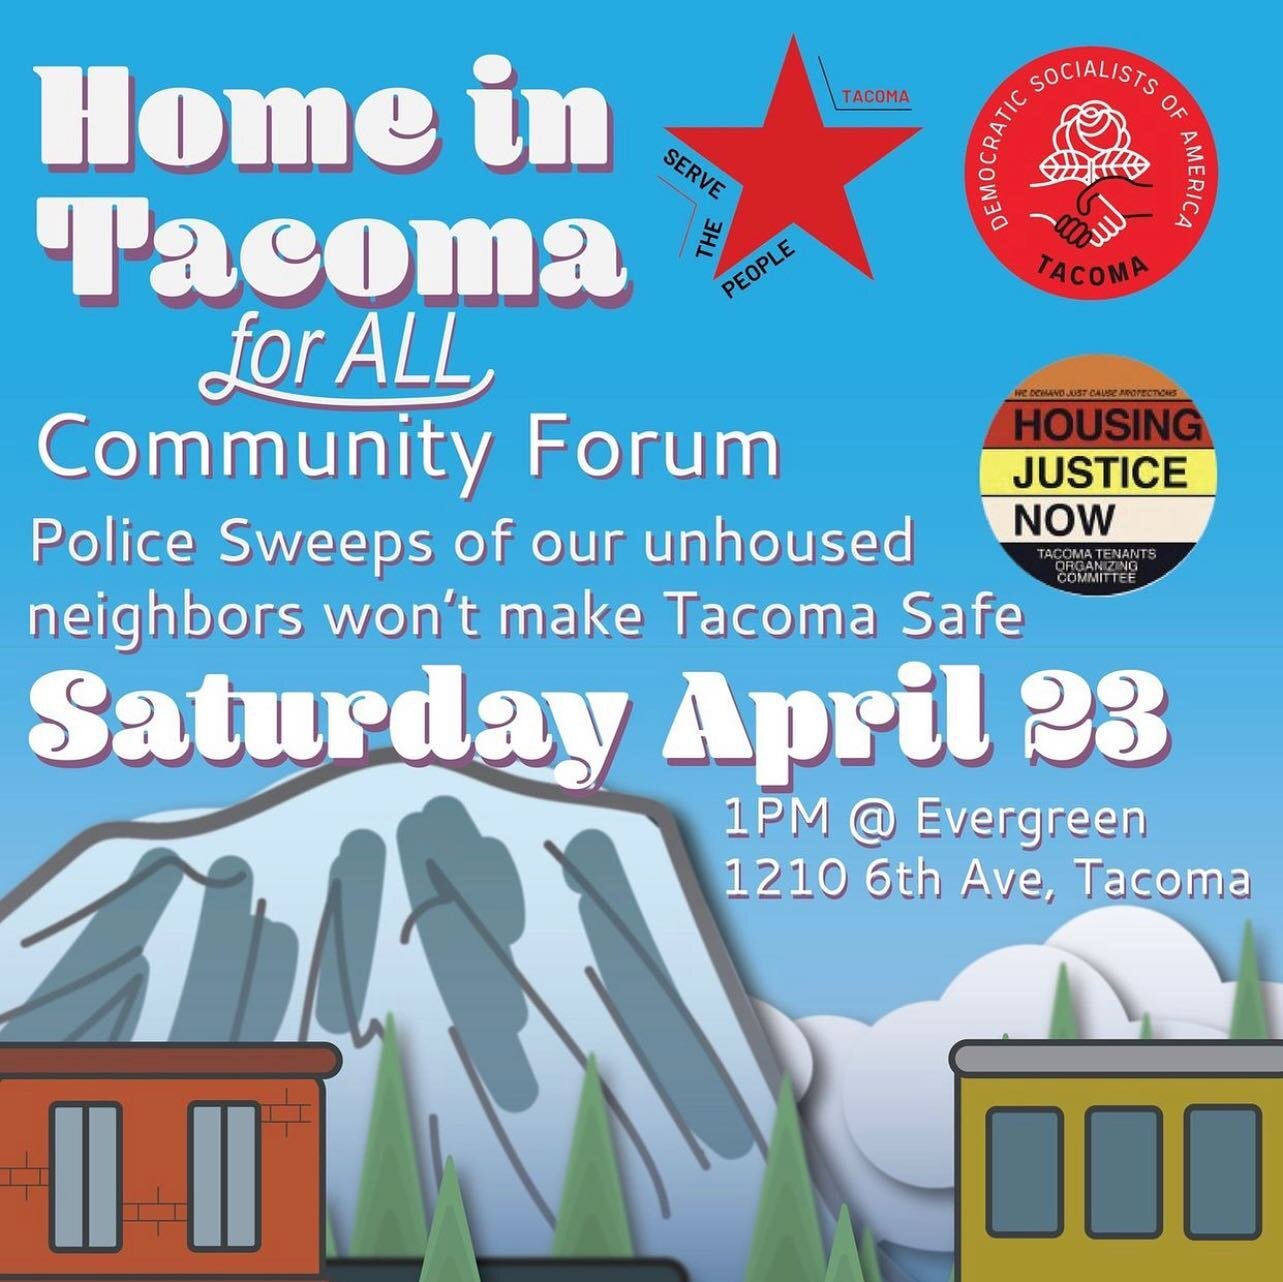 Environmental justice includes housing justice, join this community forum to discuss what the future could look like! 🏡🏢🌳